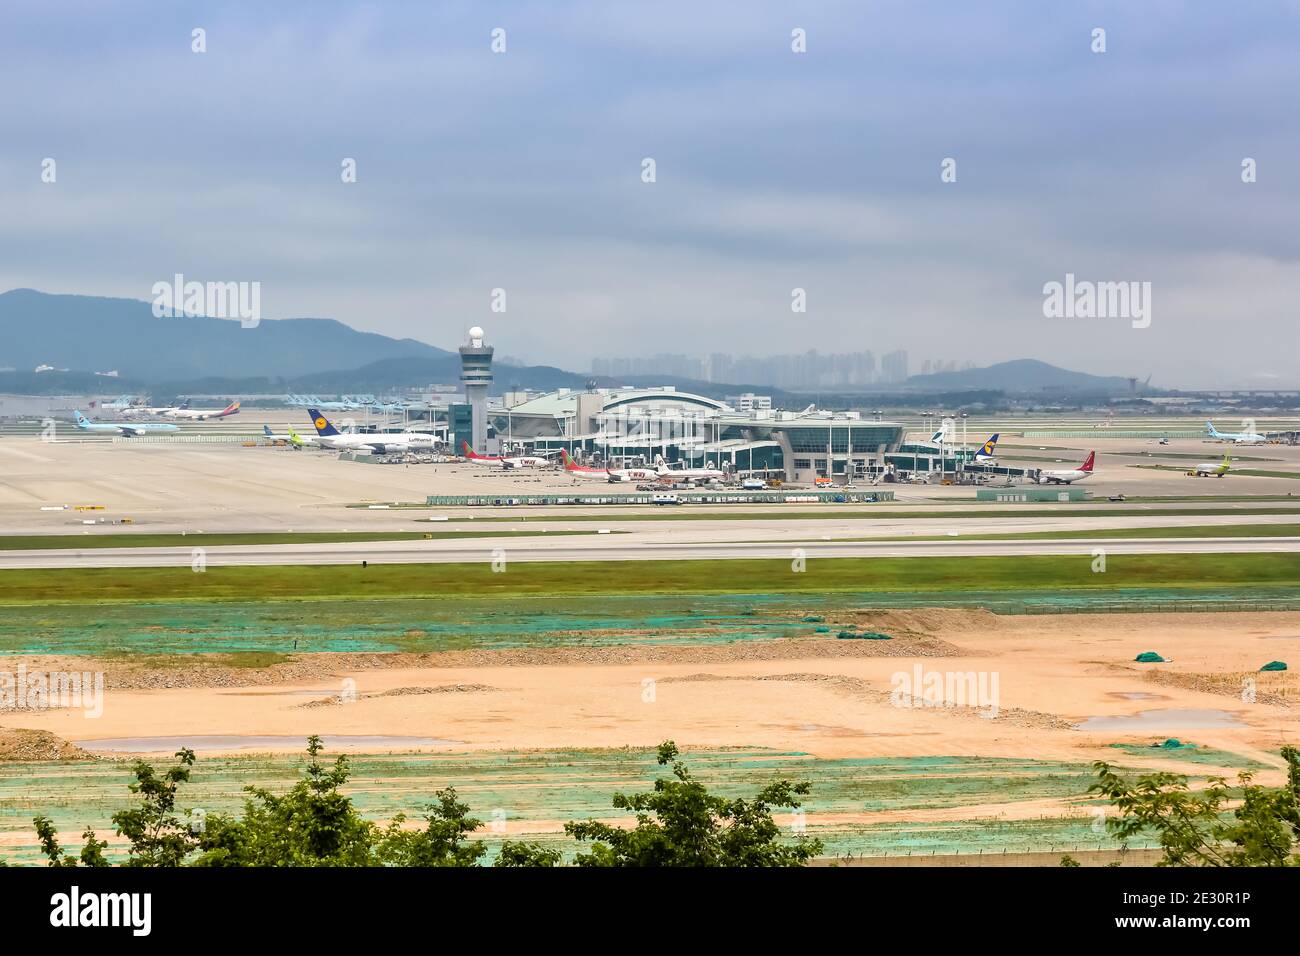 Incheon, South Korea - May 24, 2016: Overview Seoul Incheon International Airport satellite Terminal 1 in South Korea. Stock Photo